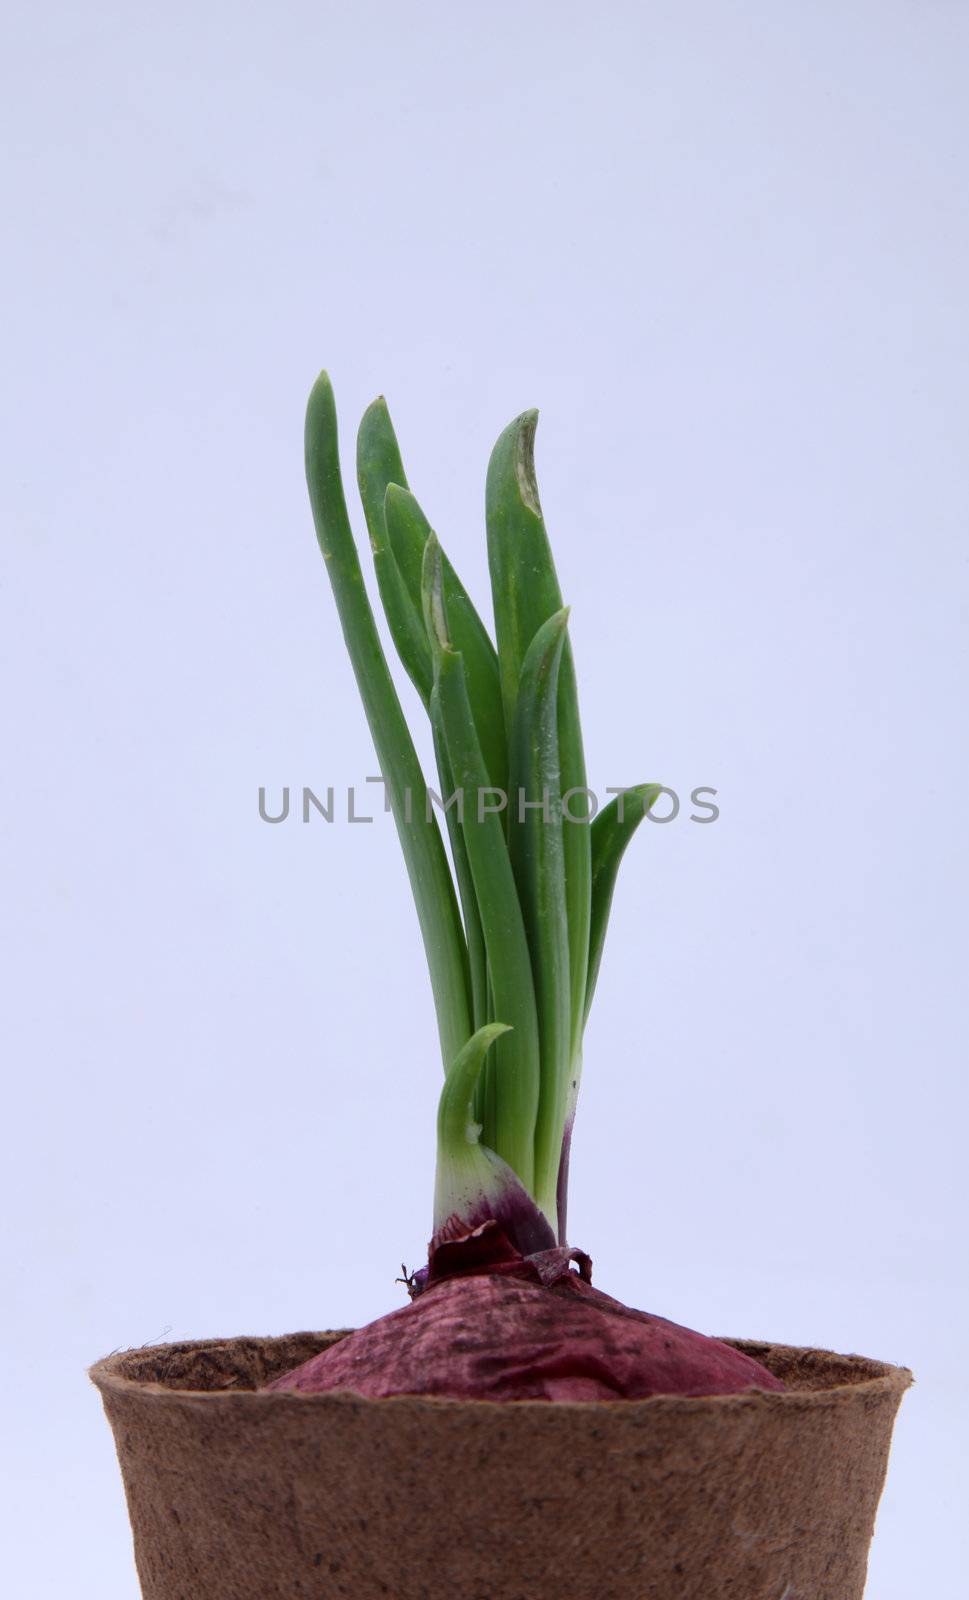 Growing onion bulbs with fresh green sprouts by atlas